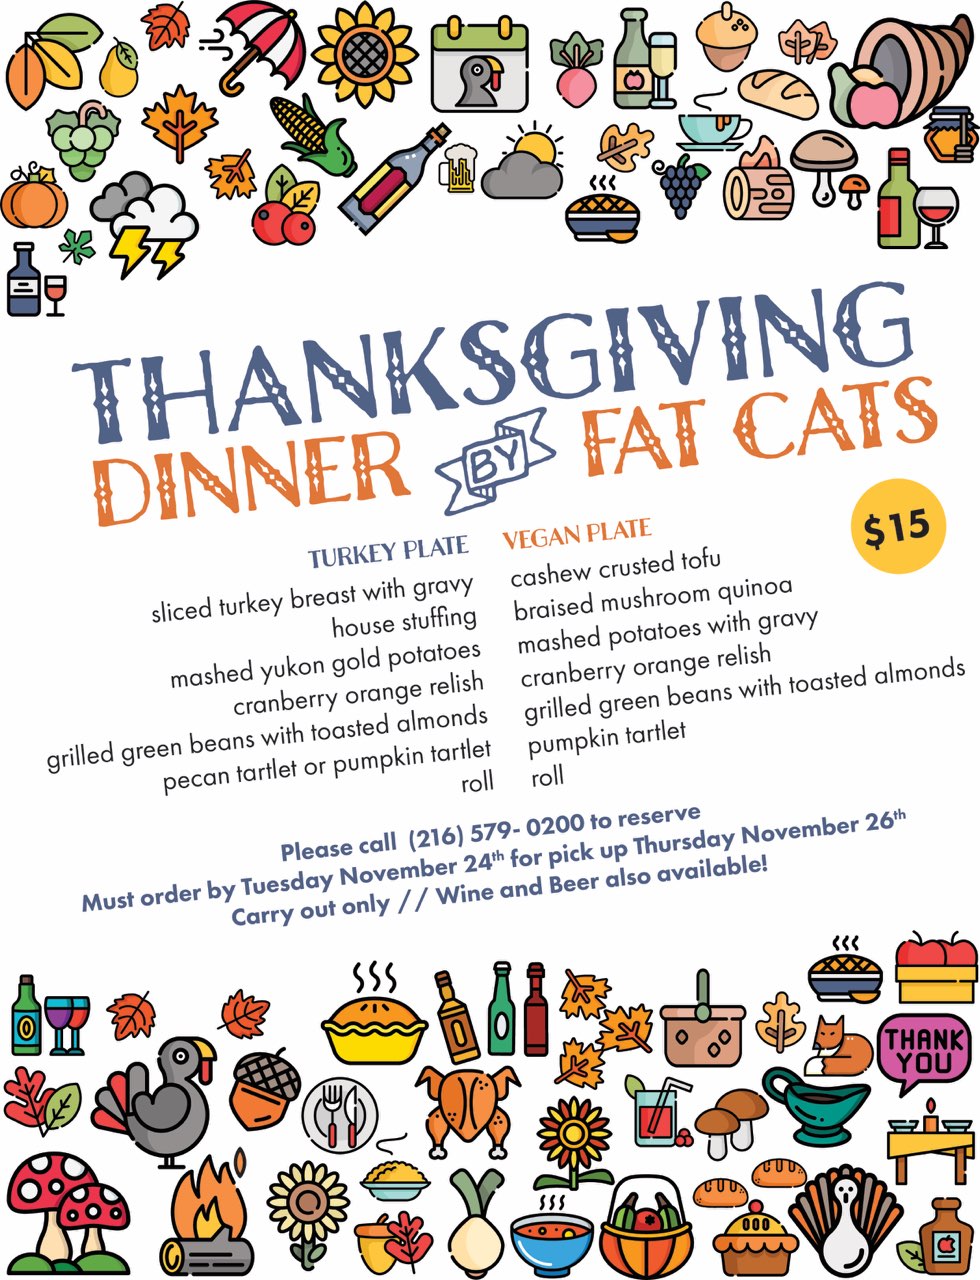 Thanksgiving Dinner At Fat Cats Tremont Ohio